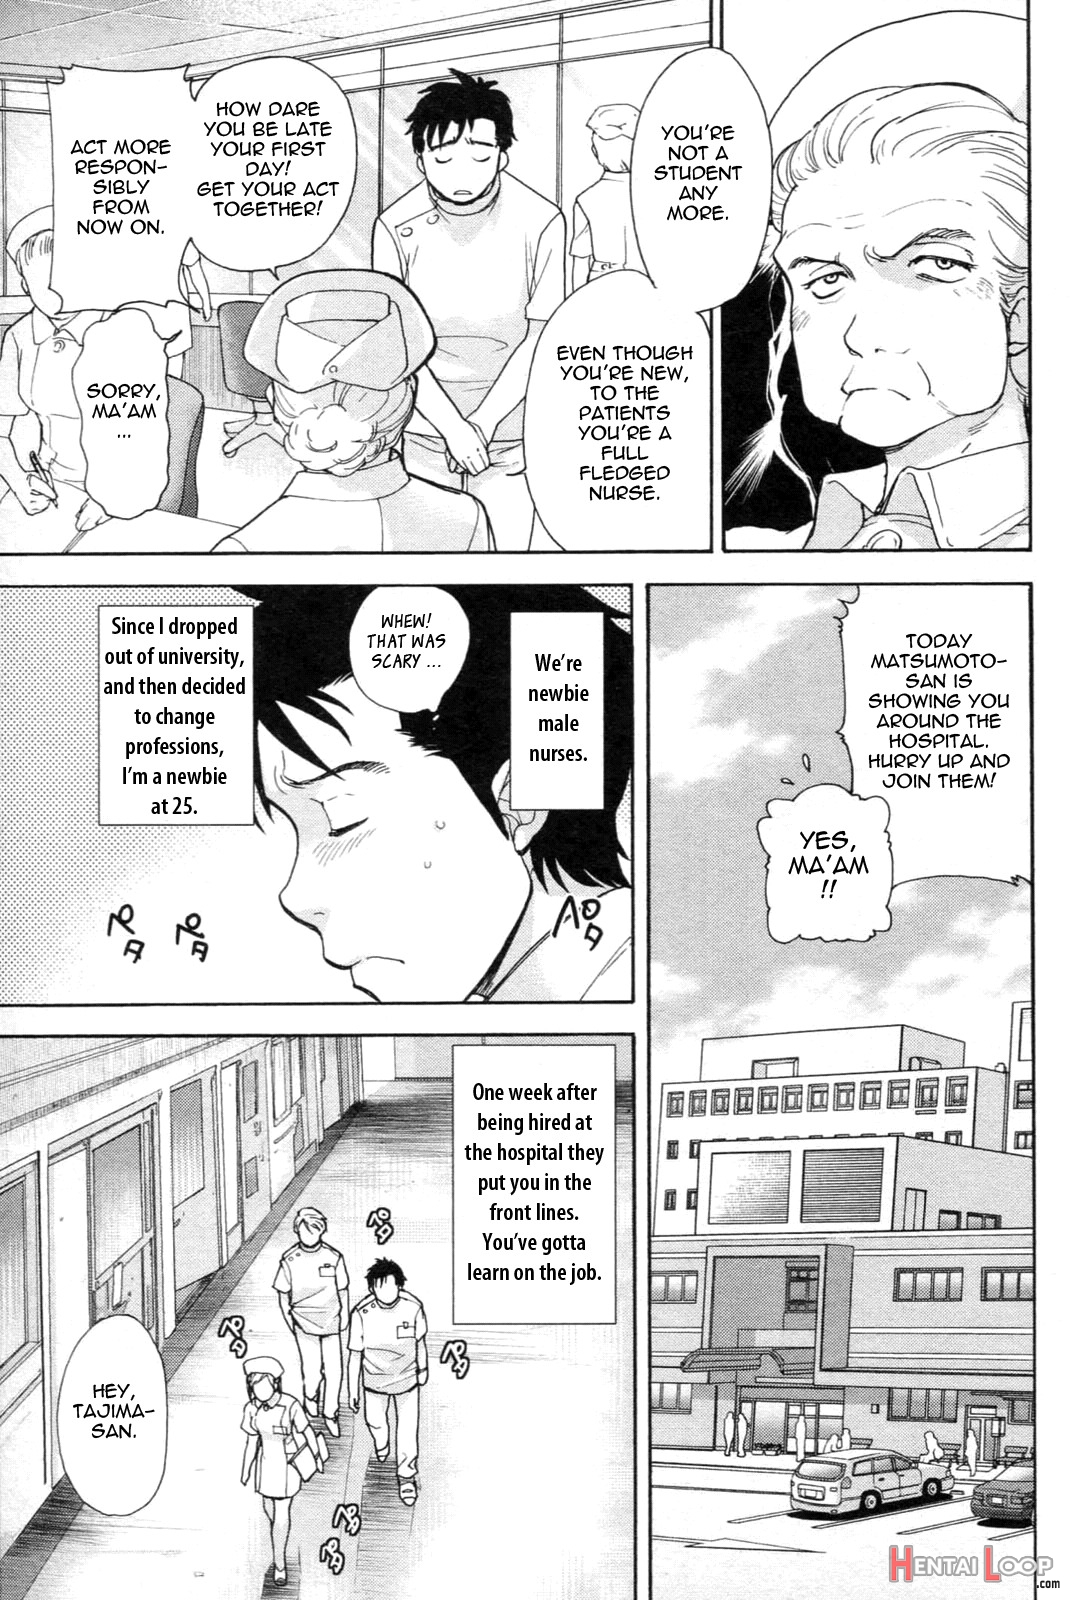 How To Go Steady With A Nurse Vol. 1 page 8